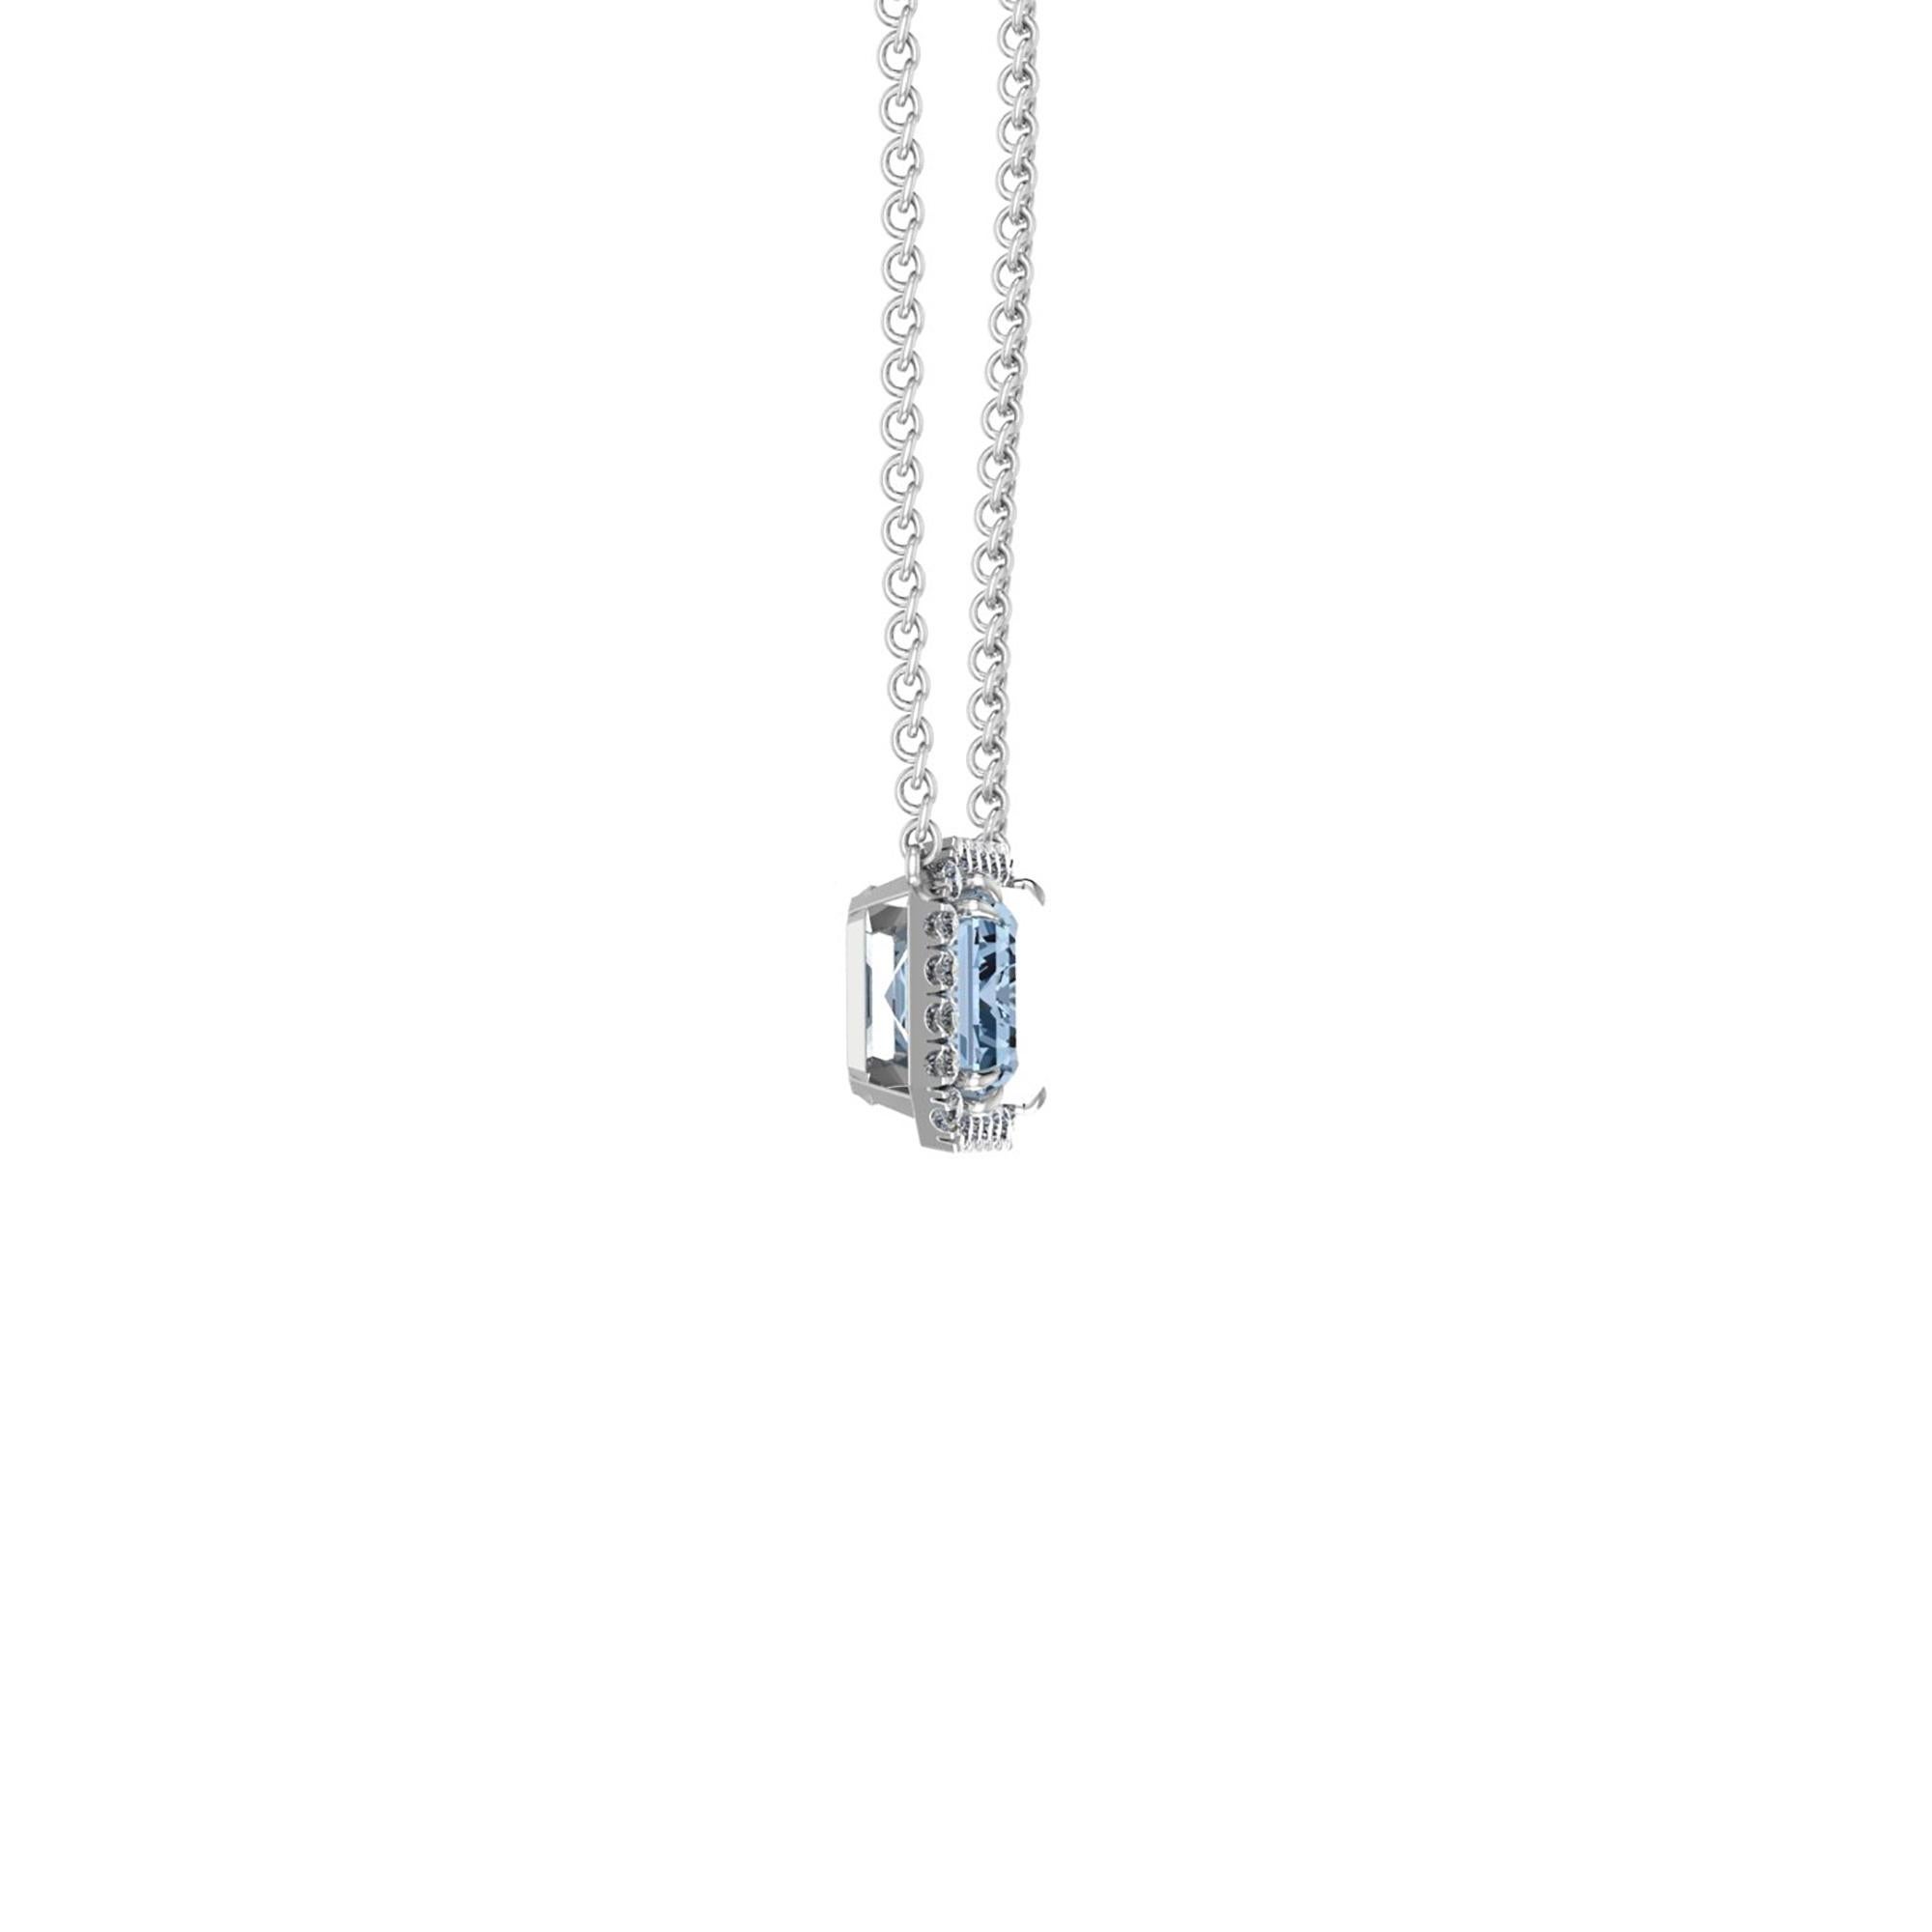 4.61 carat Aquamarine, emerald cut, very high quality color, eye clean gem, set in a made to perfection Platinum 950 double claw prongs with white diamond Halo of approximately 0.22 carat diamonds hand set.
The necklace length can be adjusted at 18